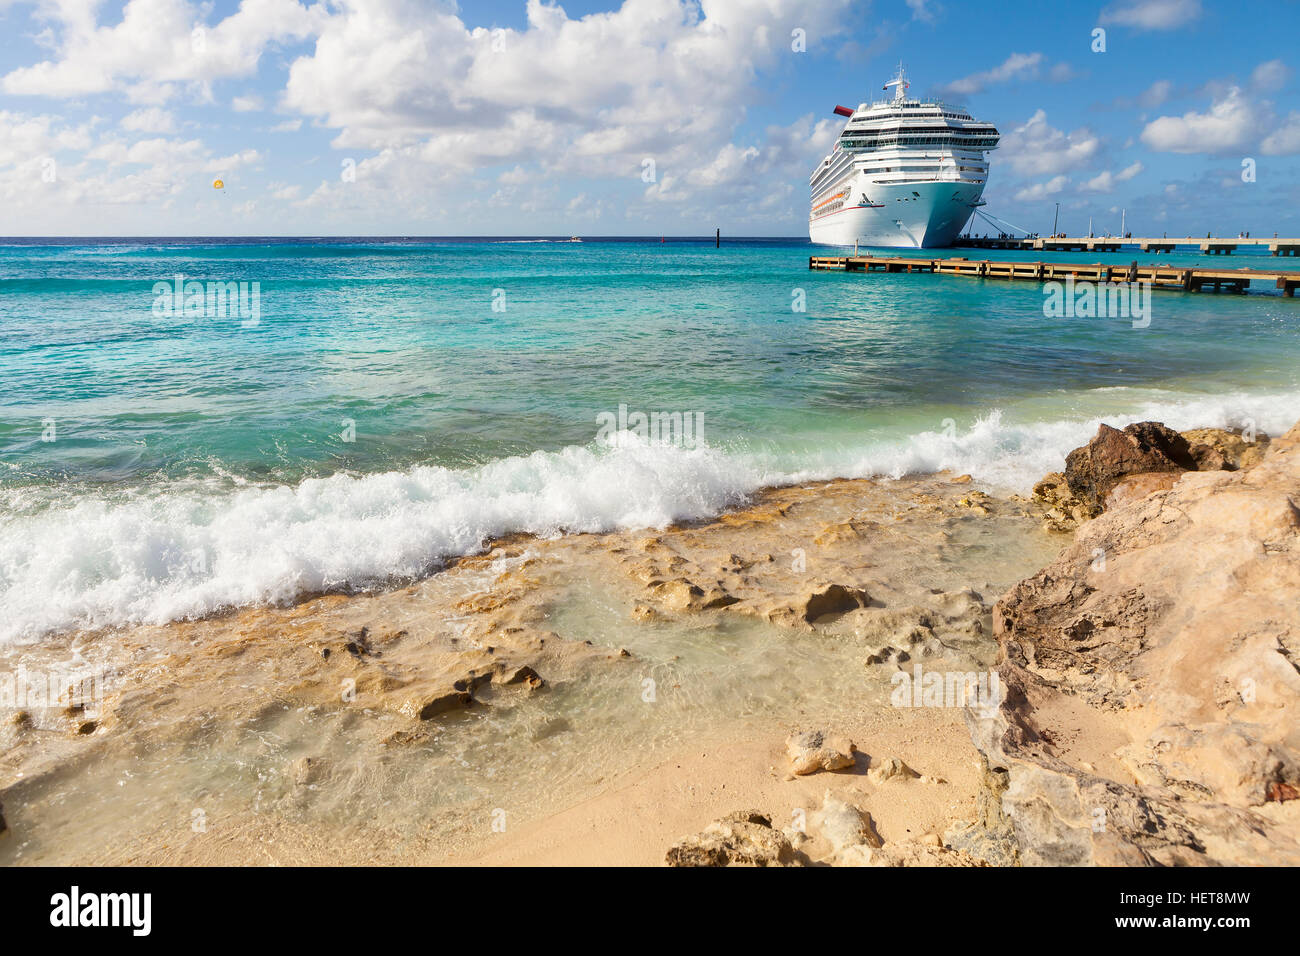 Cruise Ship in Caribbean Tropical Port with ocean surf and shore. Stock Photo